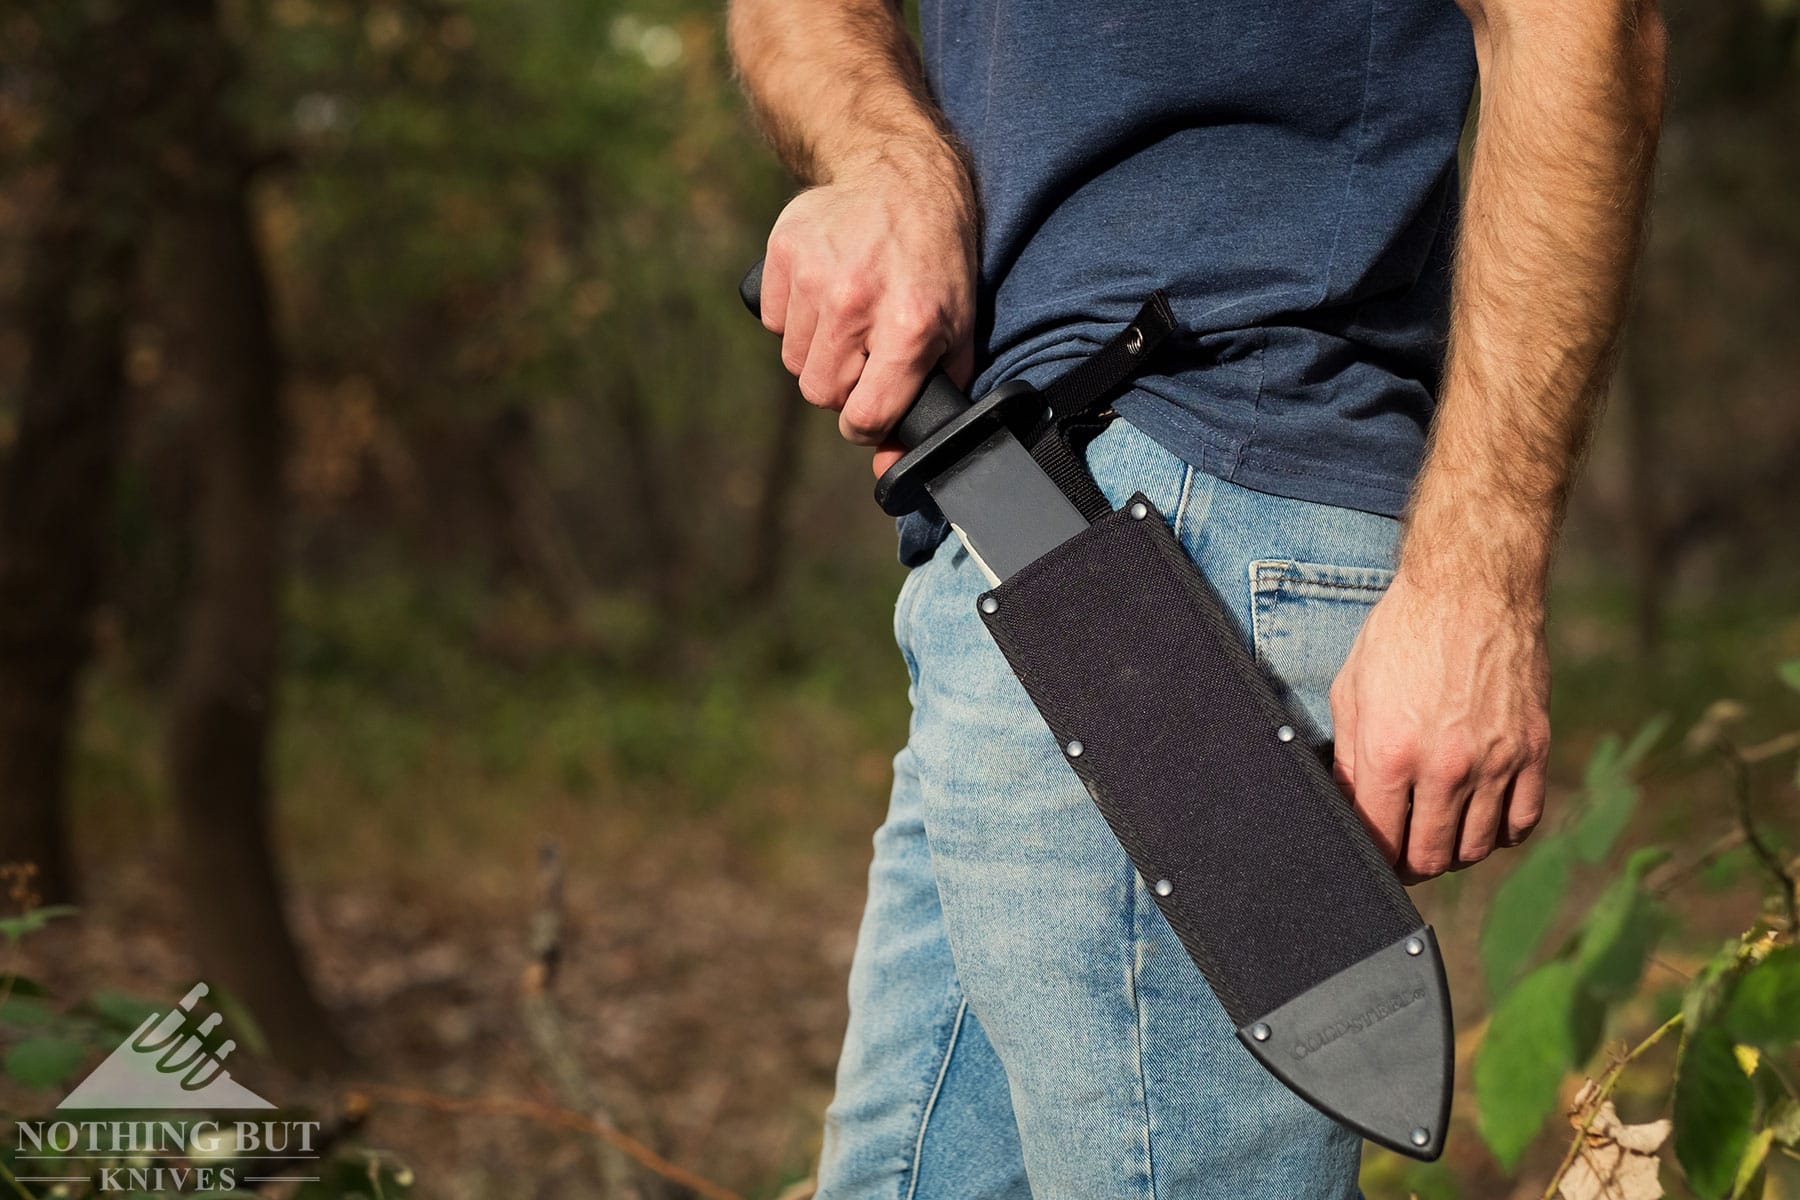 The Black Bear Bowie knife being deployed from its sheath.